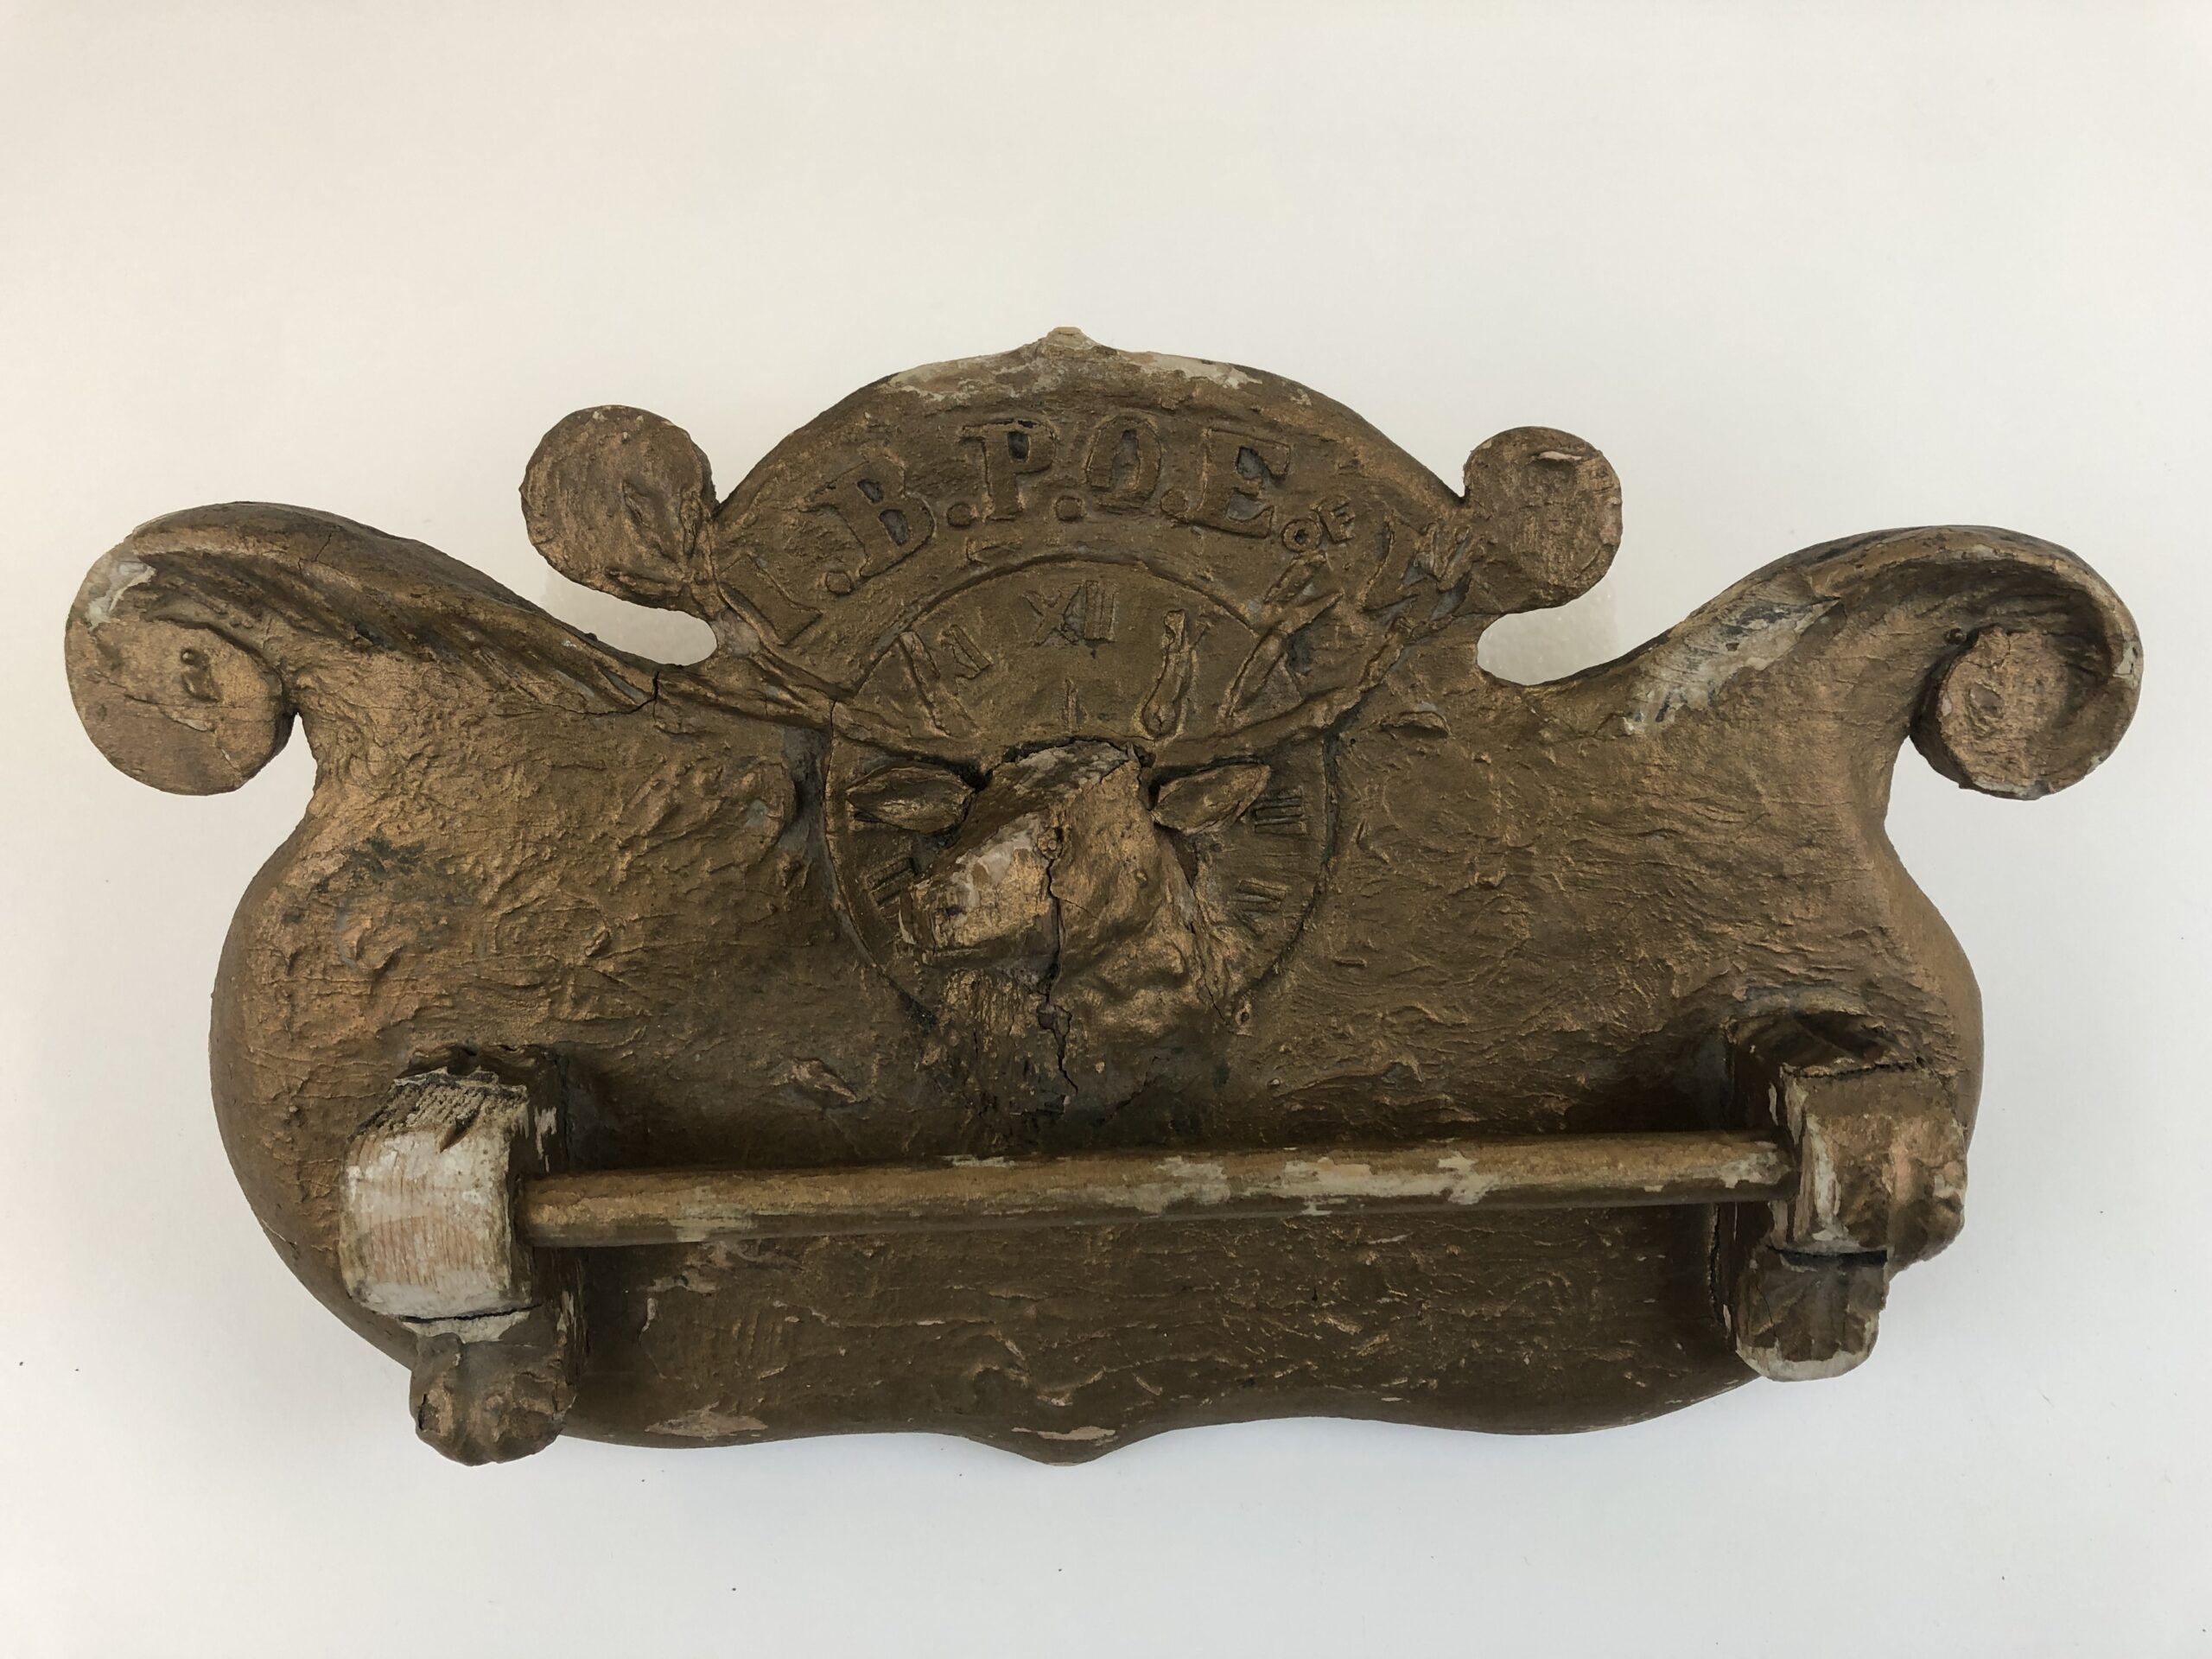 Wood plaque, covered in plaster and painted gold. "I.B.P.O.E. OF W." in raised print across top, an elk head with a clock face in the background.